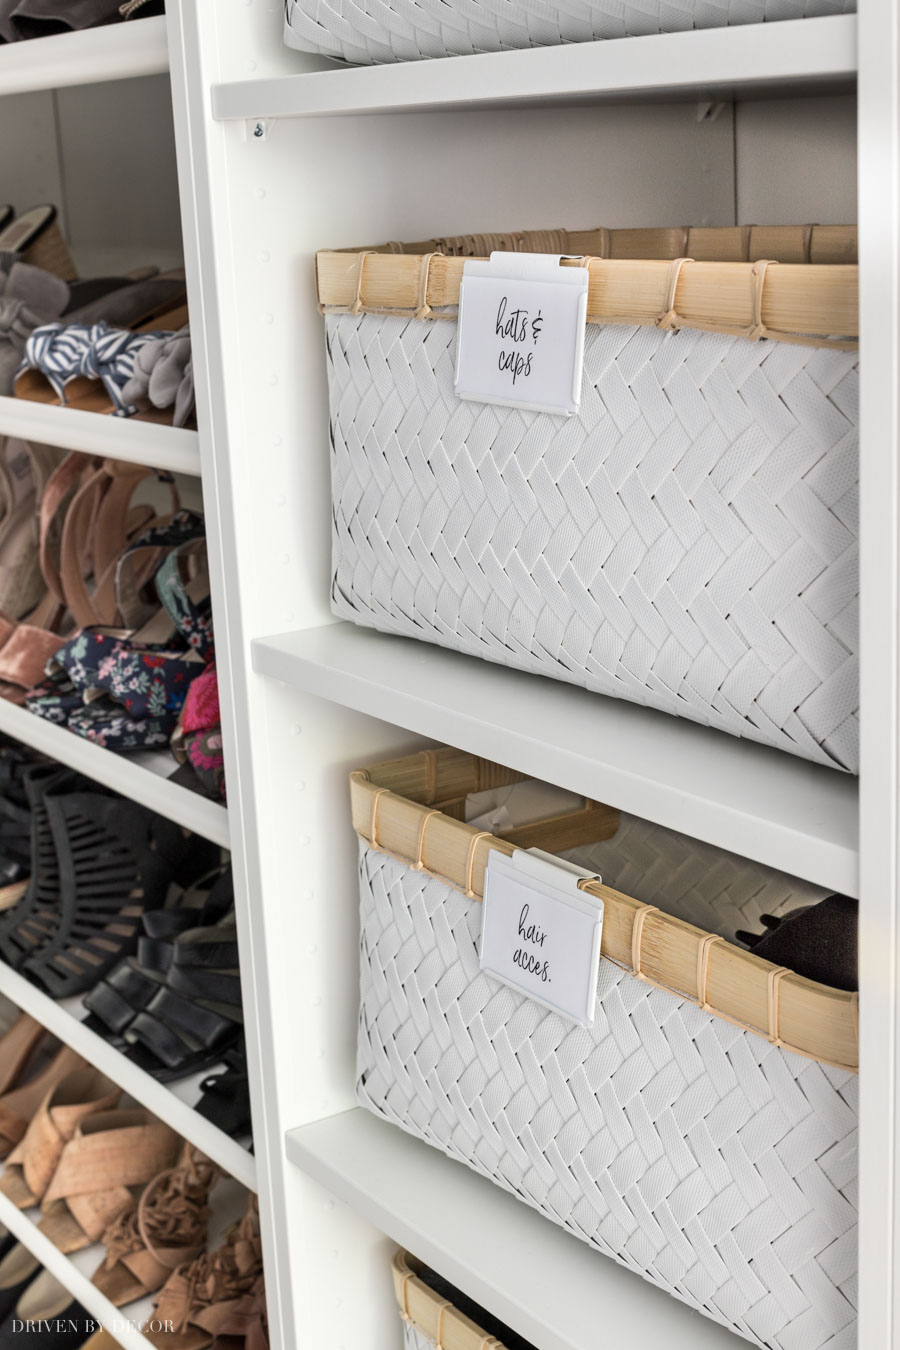 Love the top to bottom basket storage she created with shelves in her IKEA PAX closet!